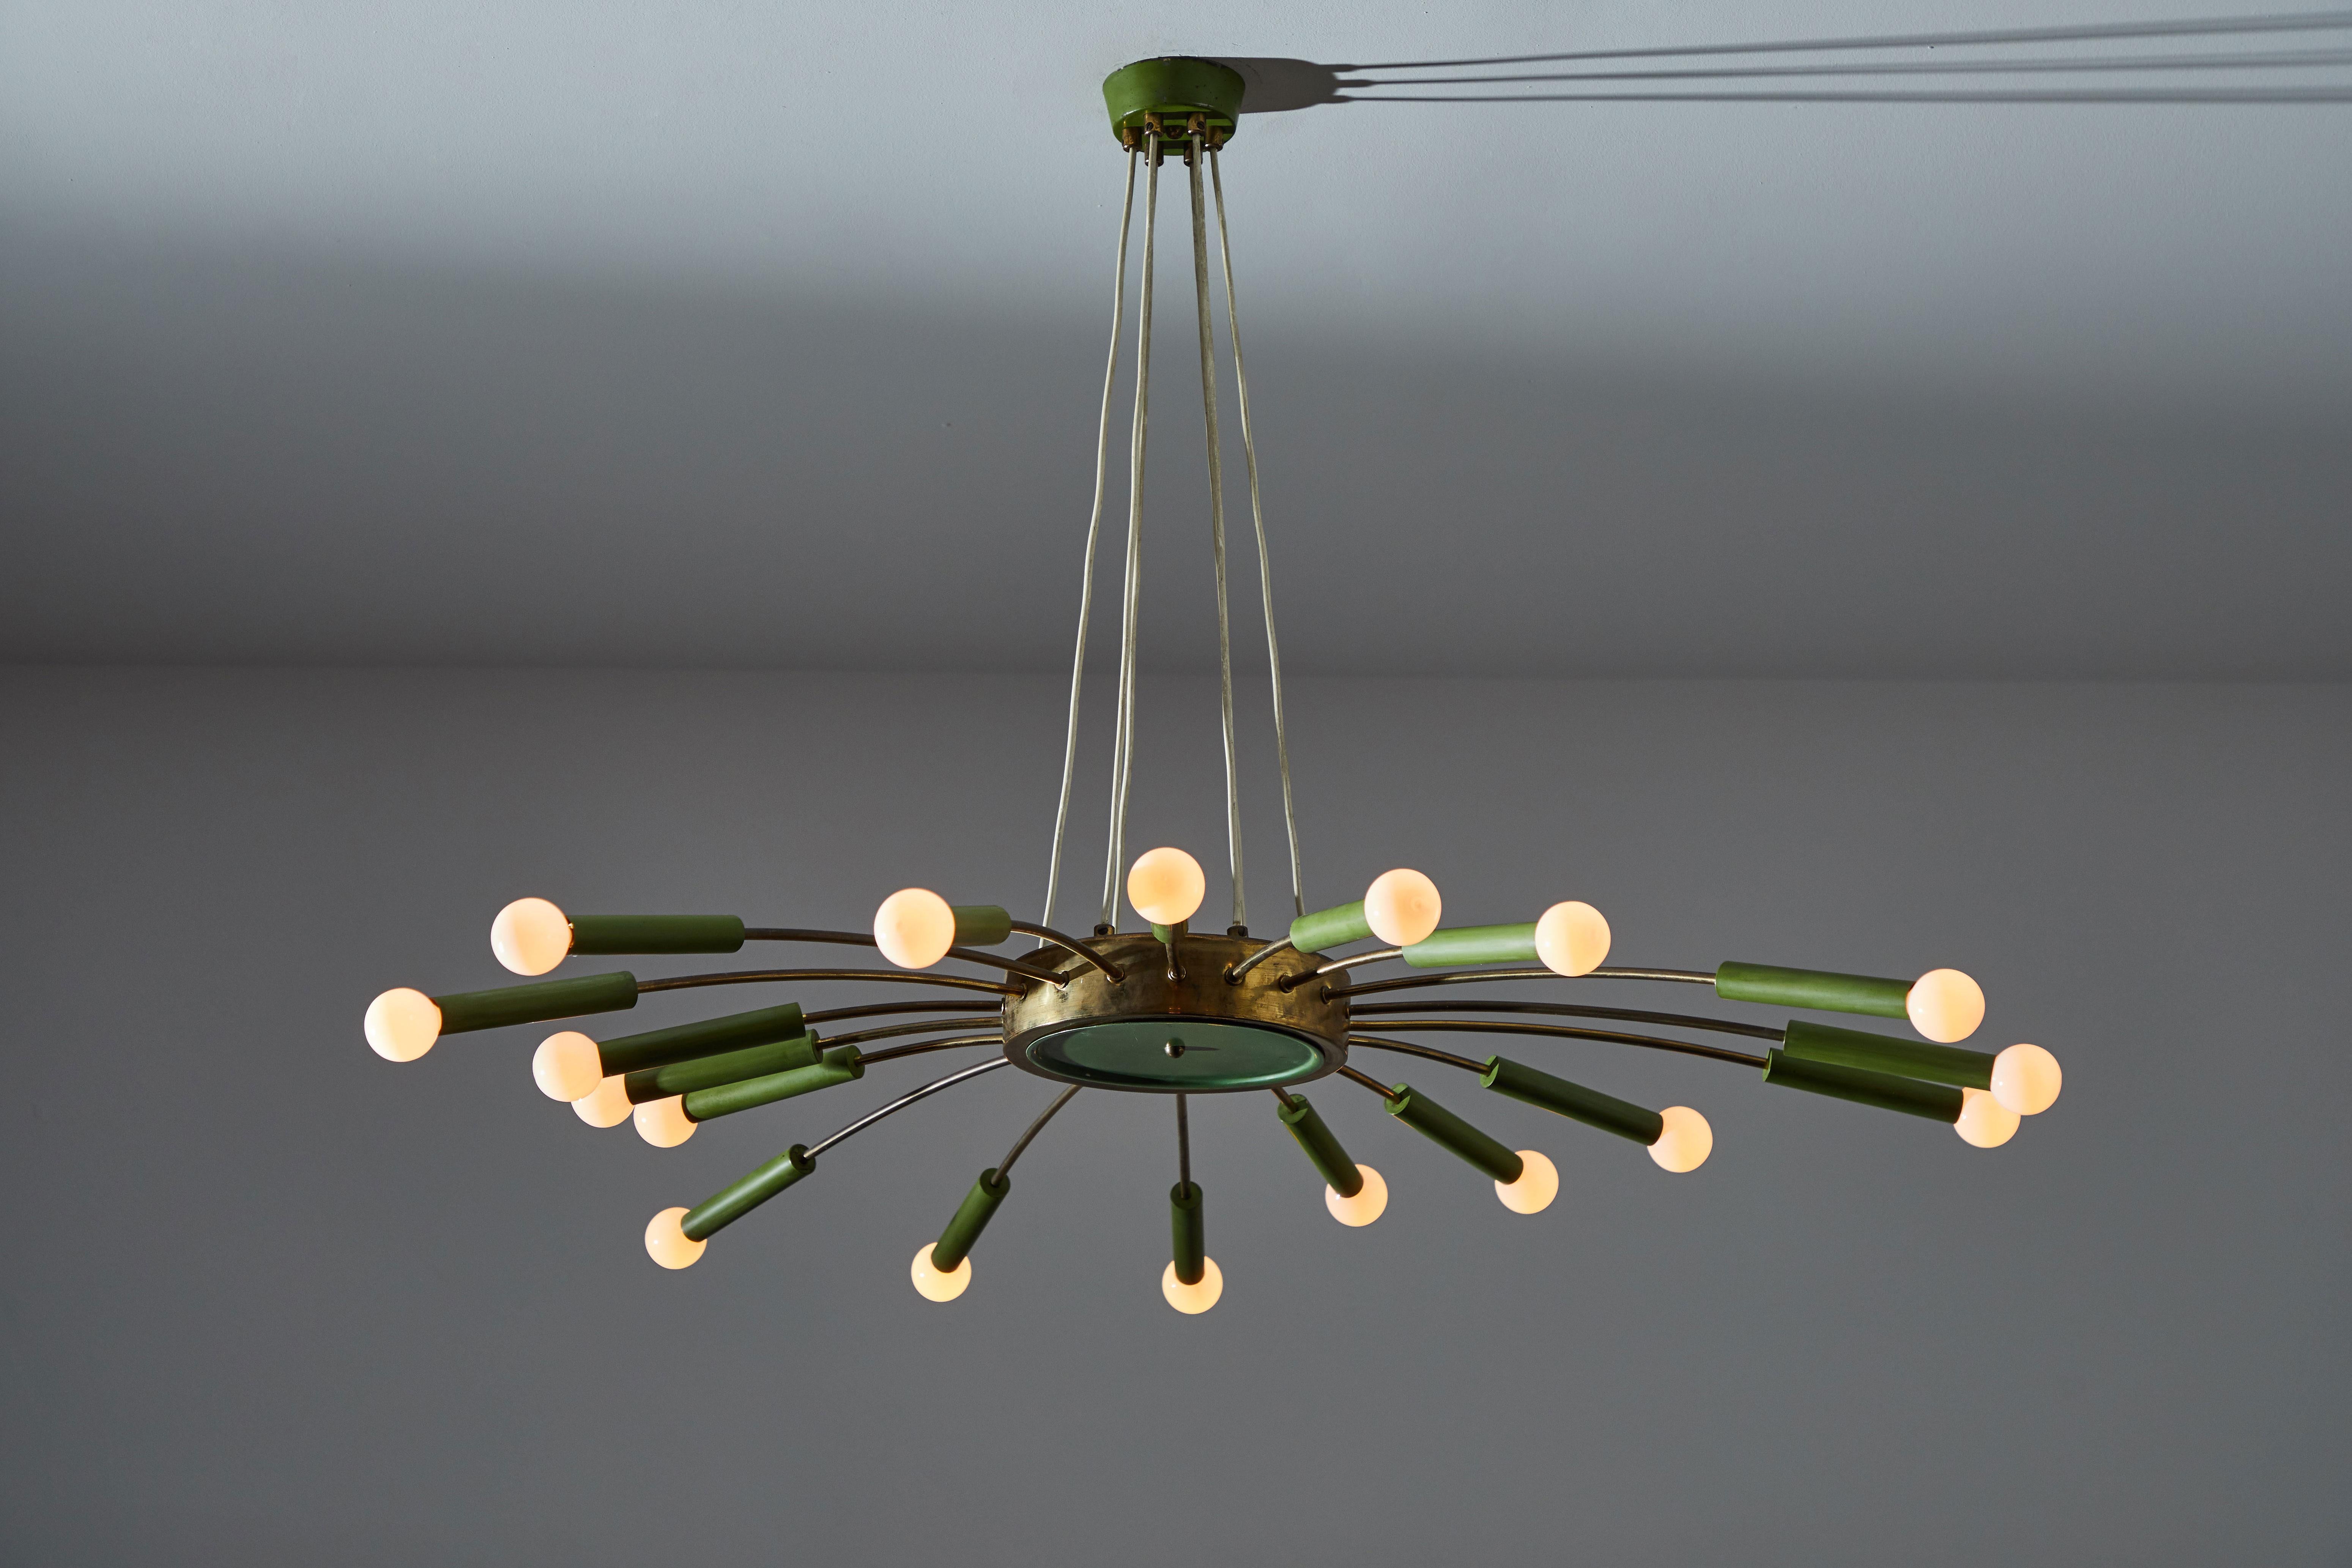 Large chandelier manufactured in Italy, circa 1950s. Brass, lacquered metal. Original paint, paint and canopy, rewired for US junction boxes. Takes eighteen E14 15w maximum bulbs.